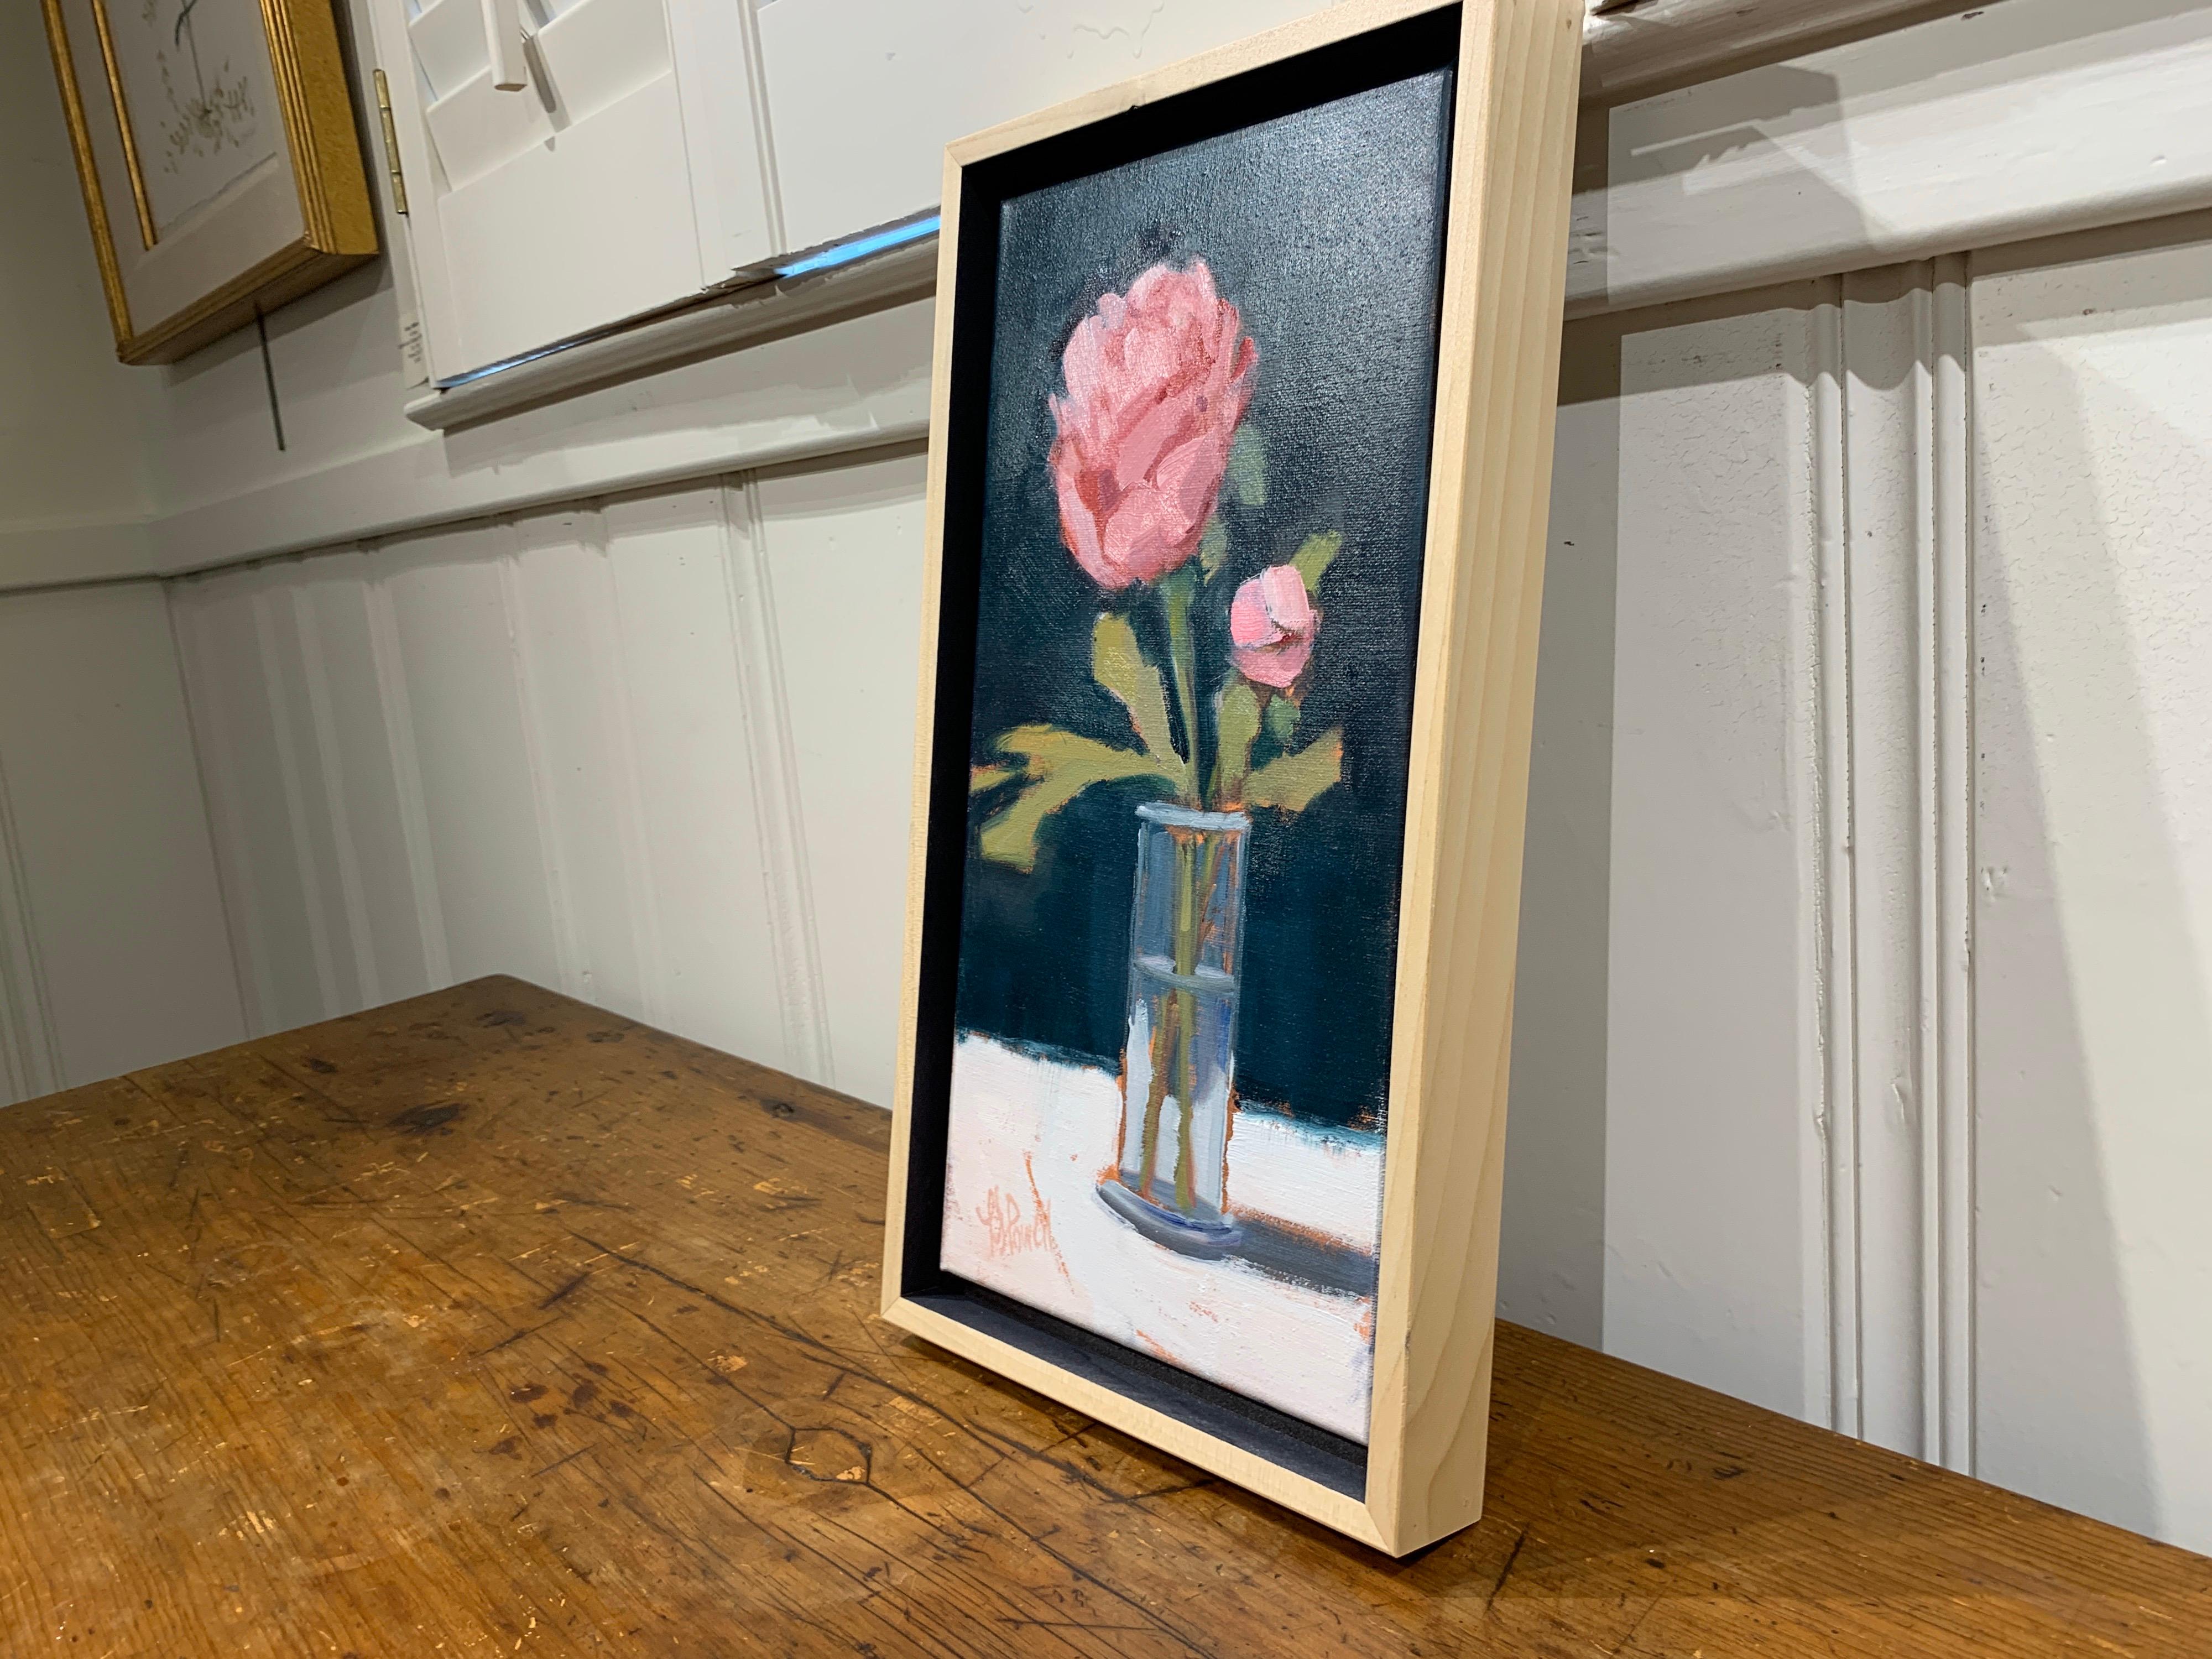 Peonies in Bud Vase by Lesley Powell, Small Oil on Board Still-Life Painting 6